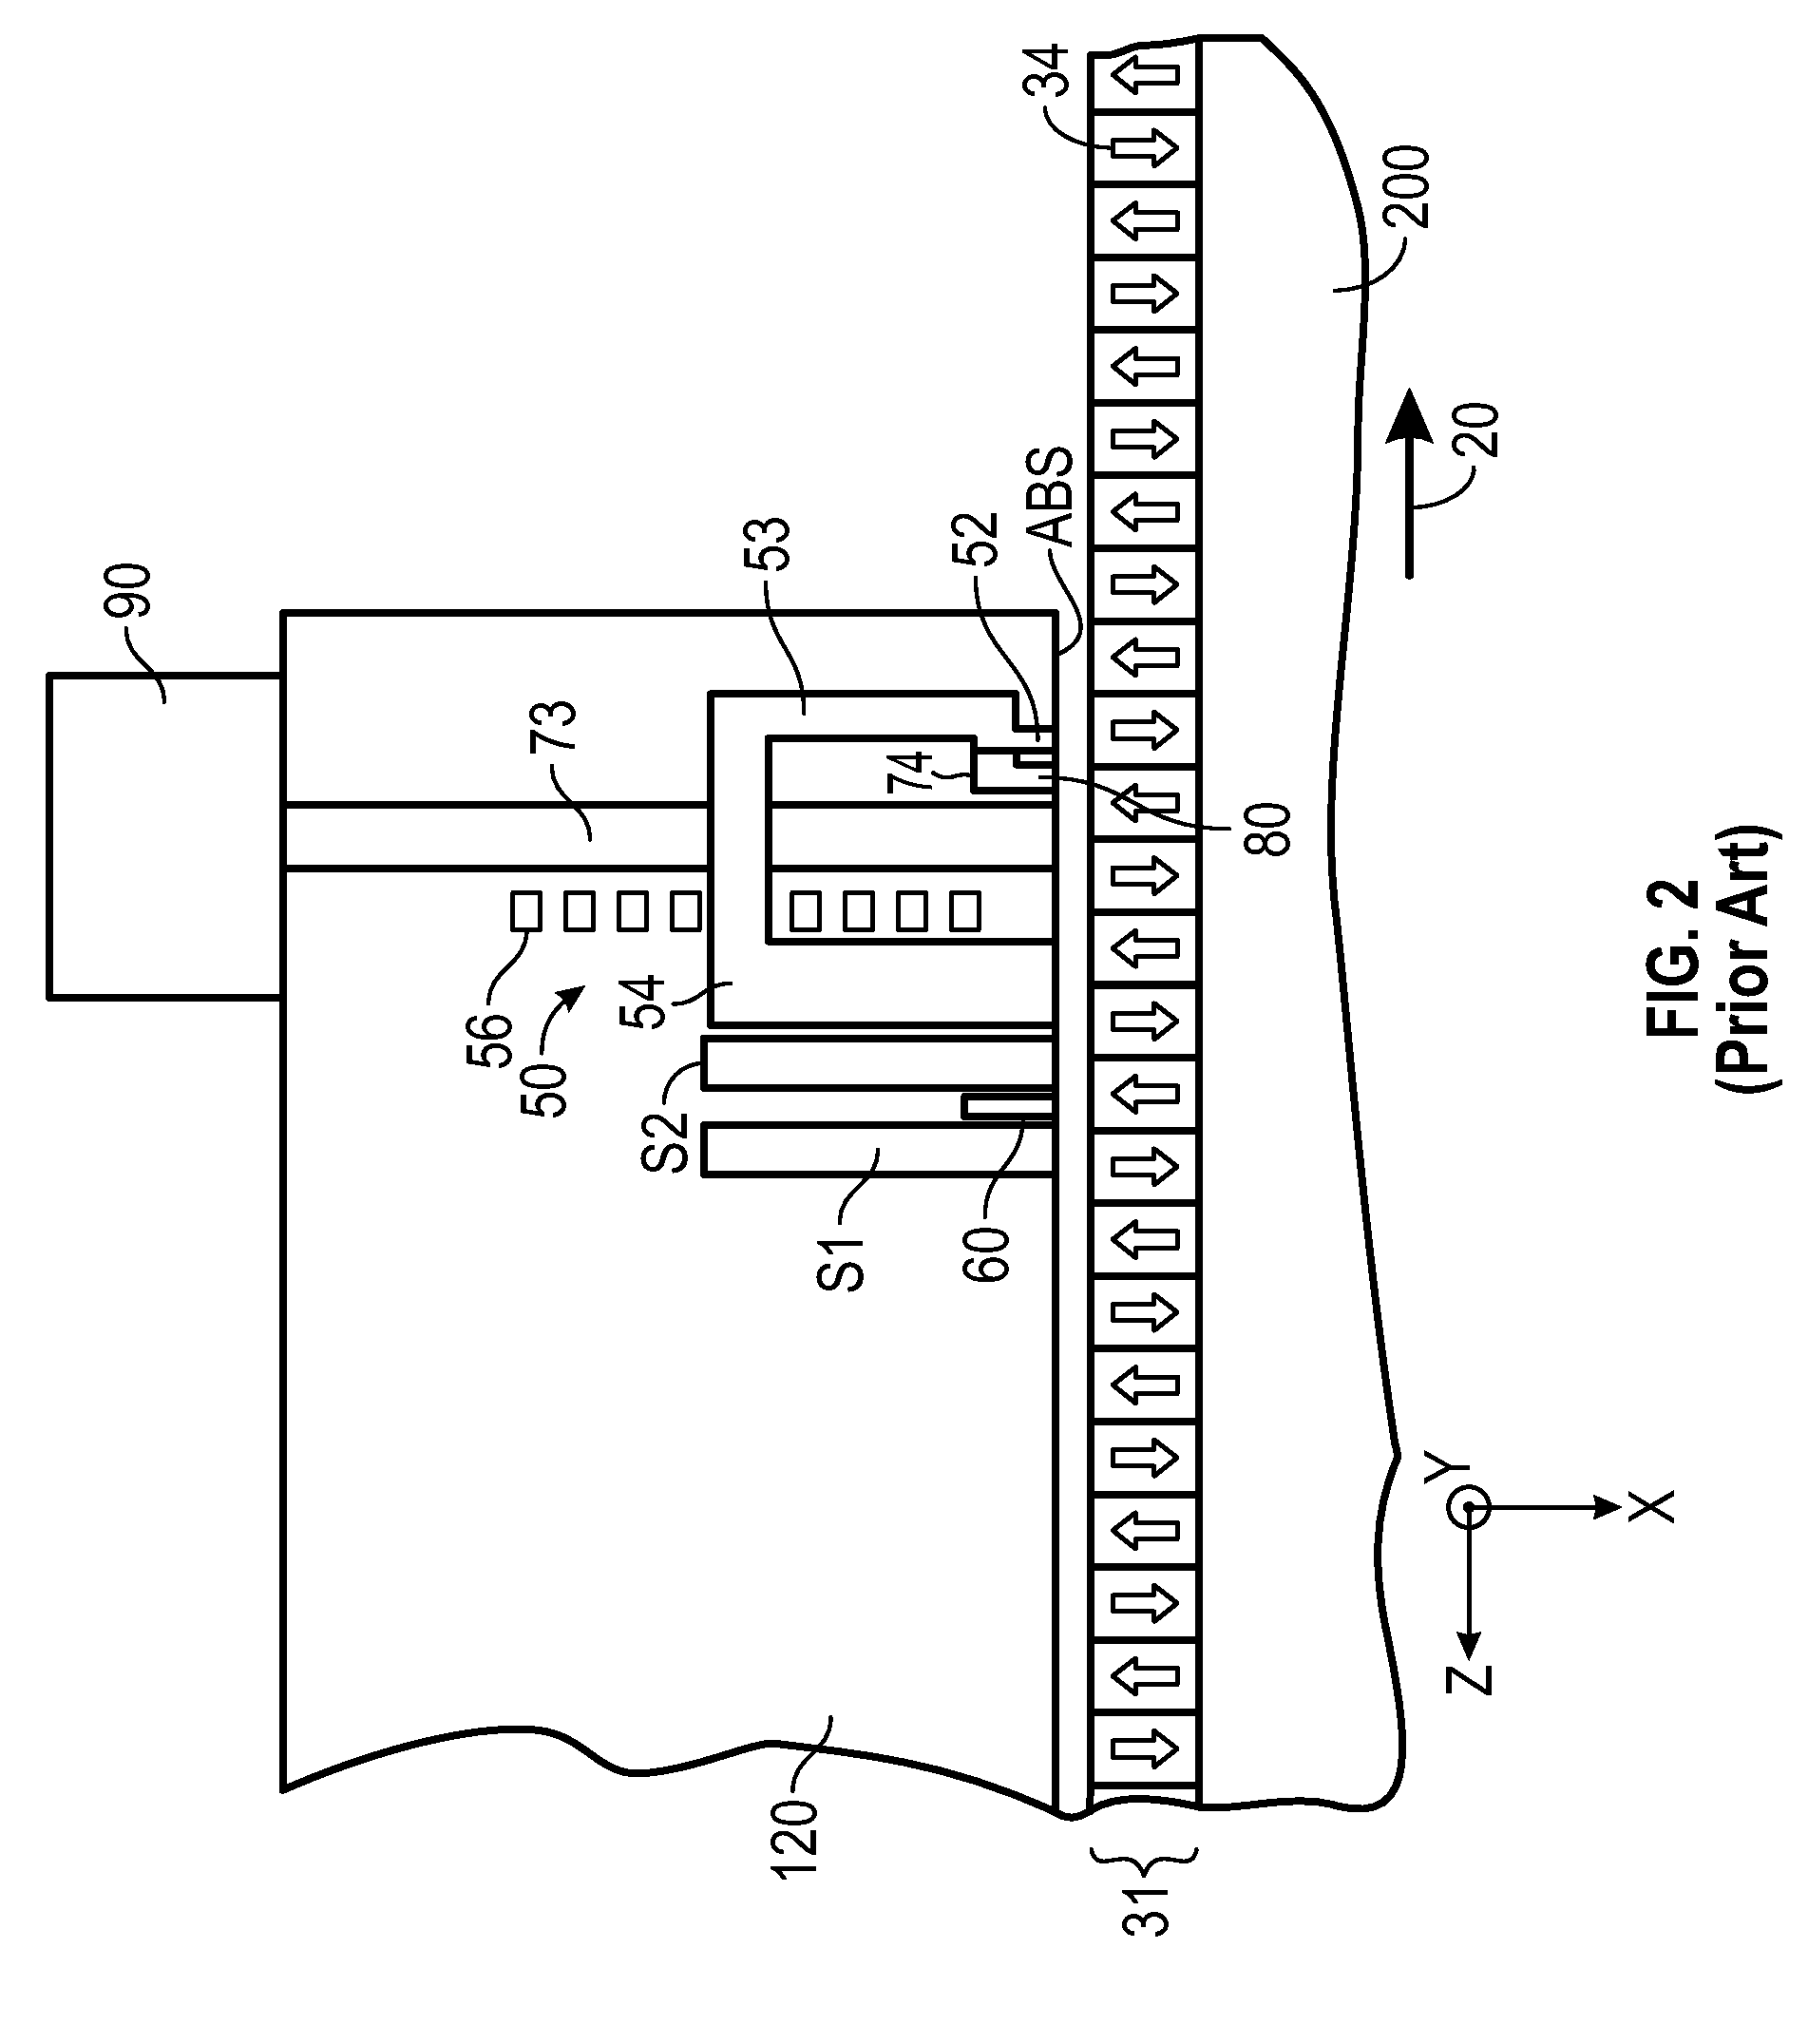 Thermally-assisted recording (TAR) head with conductive layer between the near-field transducer and the write pole